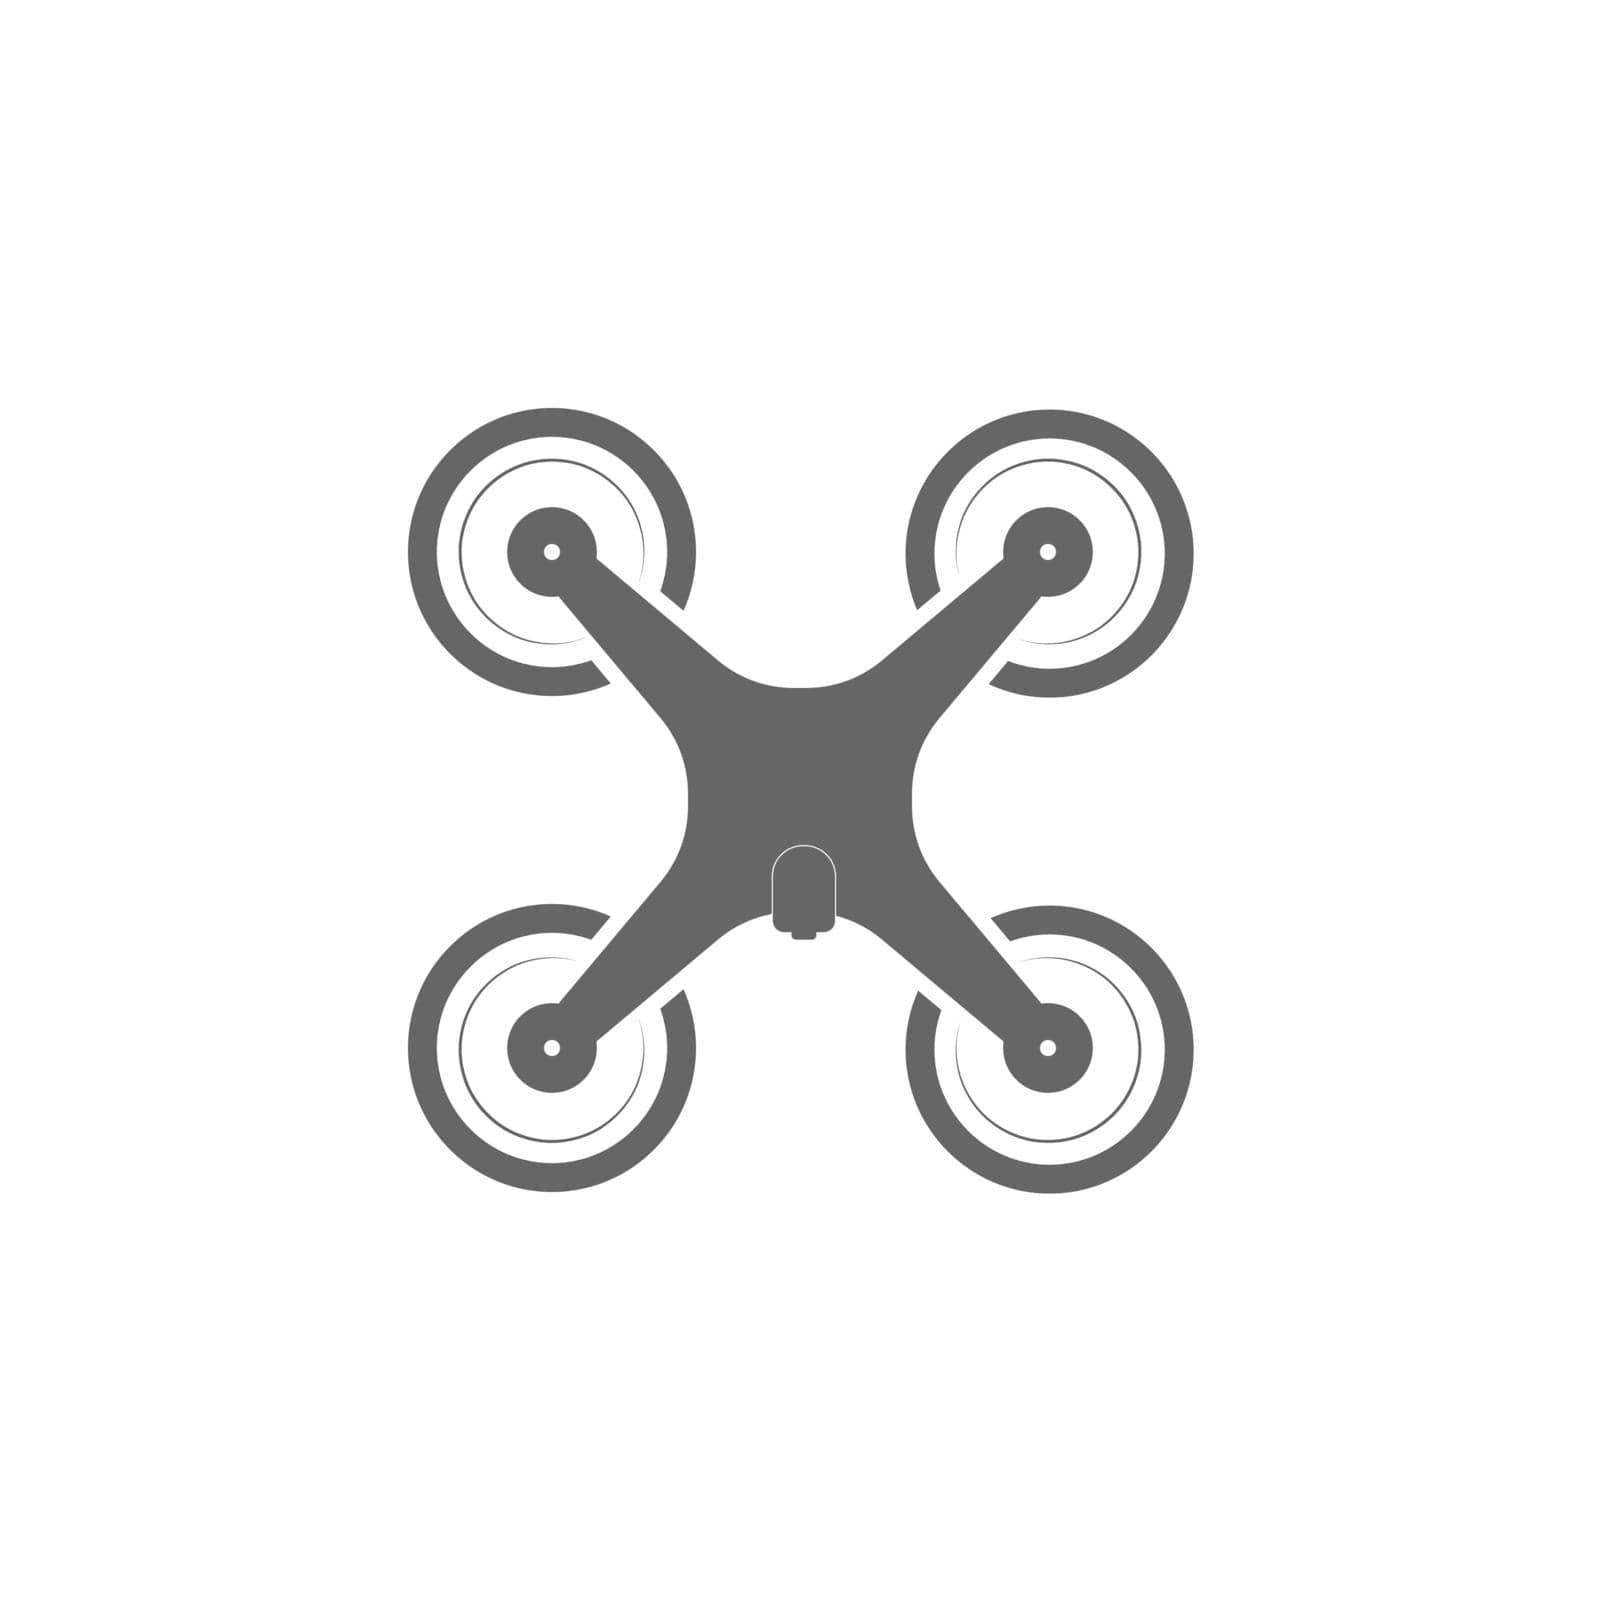 Quadrocopter icon with camera. Flat style, isolated on a white background.